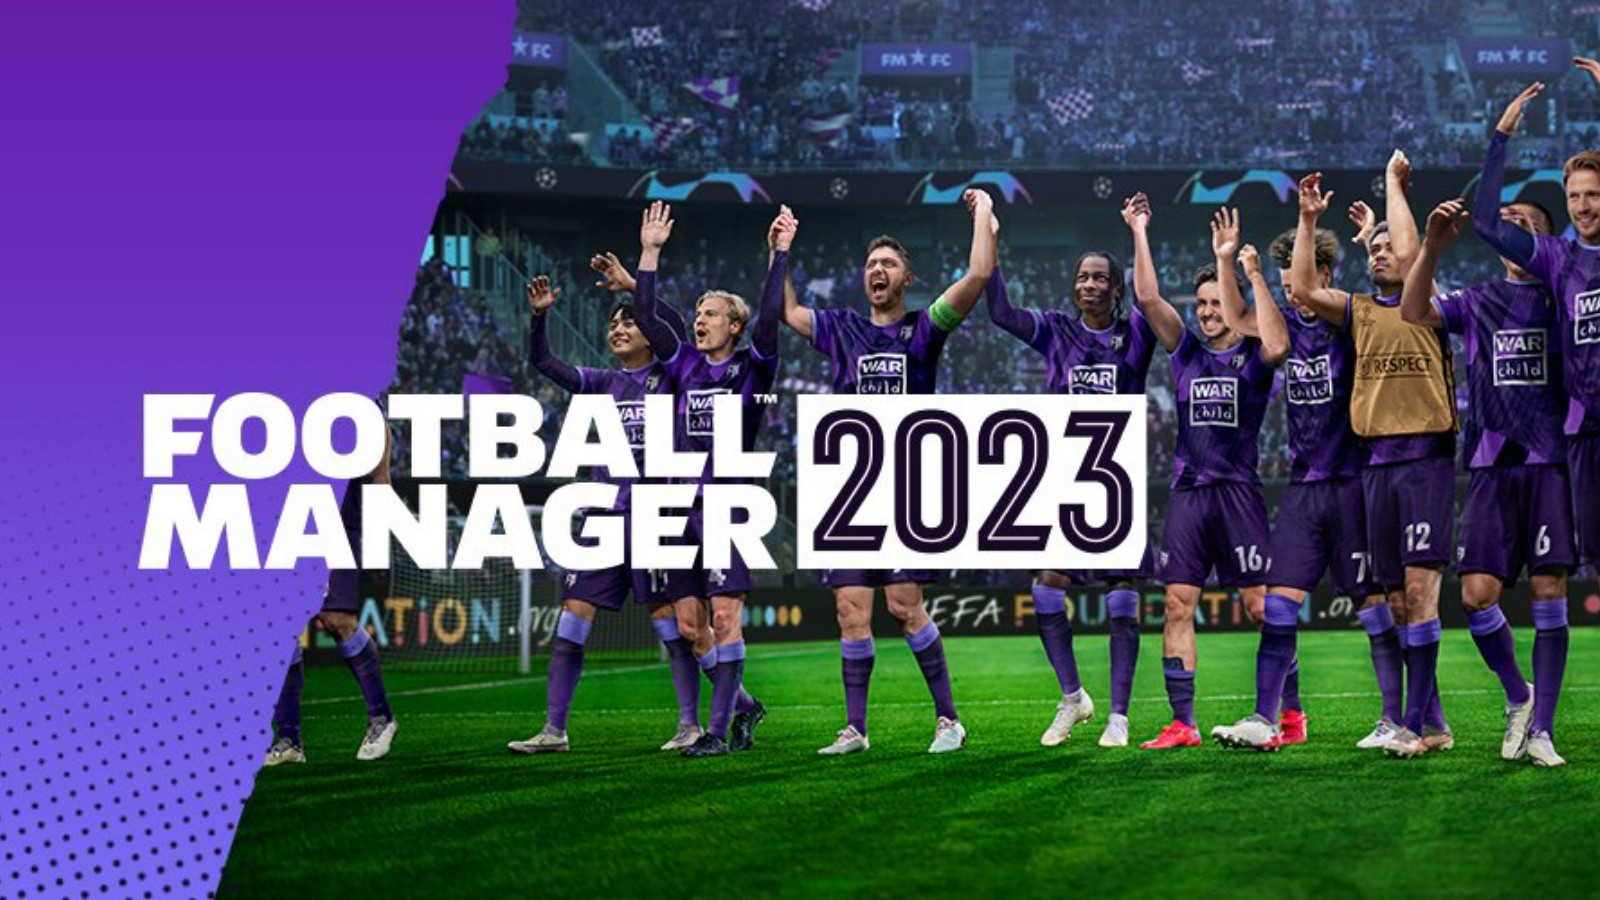 Football Manager 2023 Mobile (FM 23) 14.4.0 Apk Obb (Real Names) 